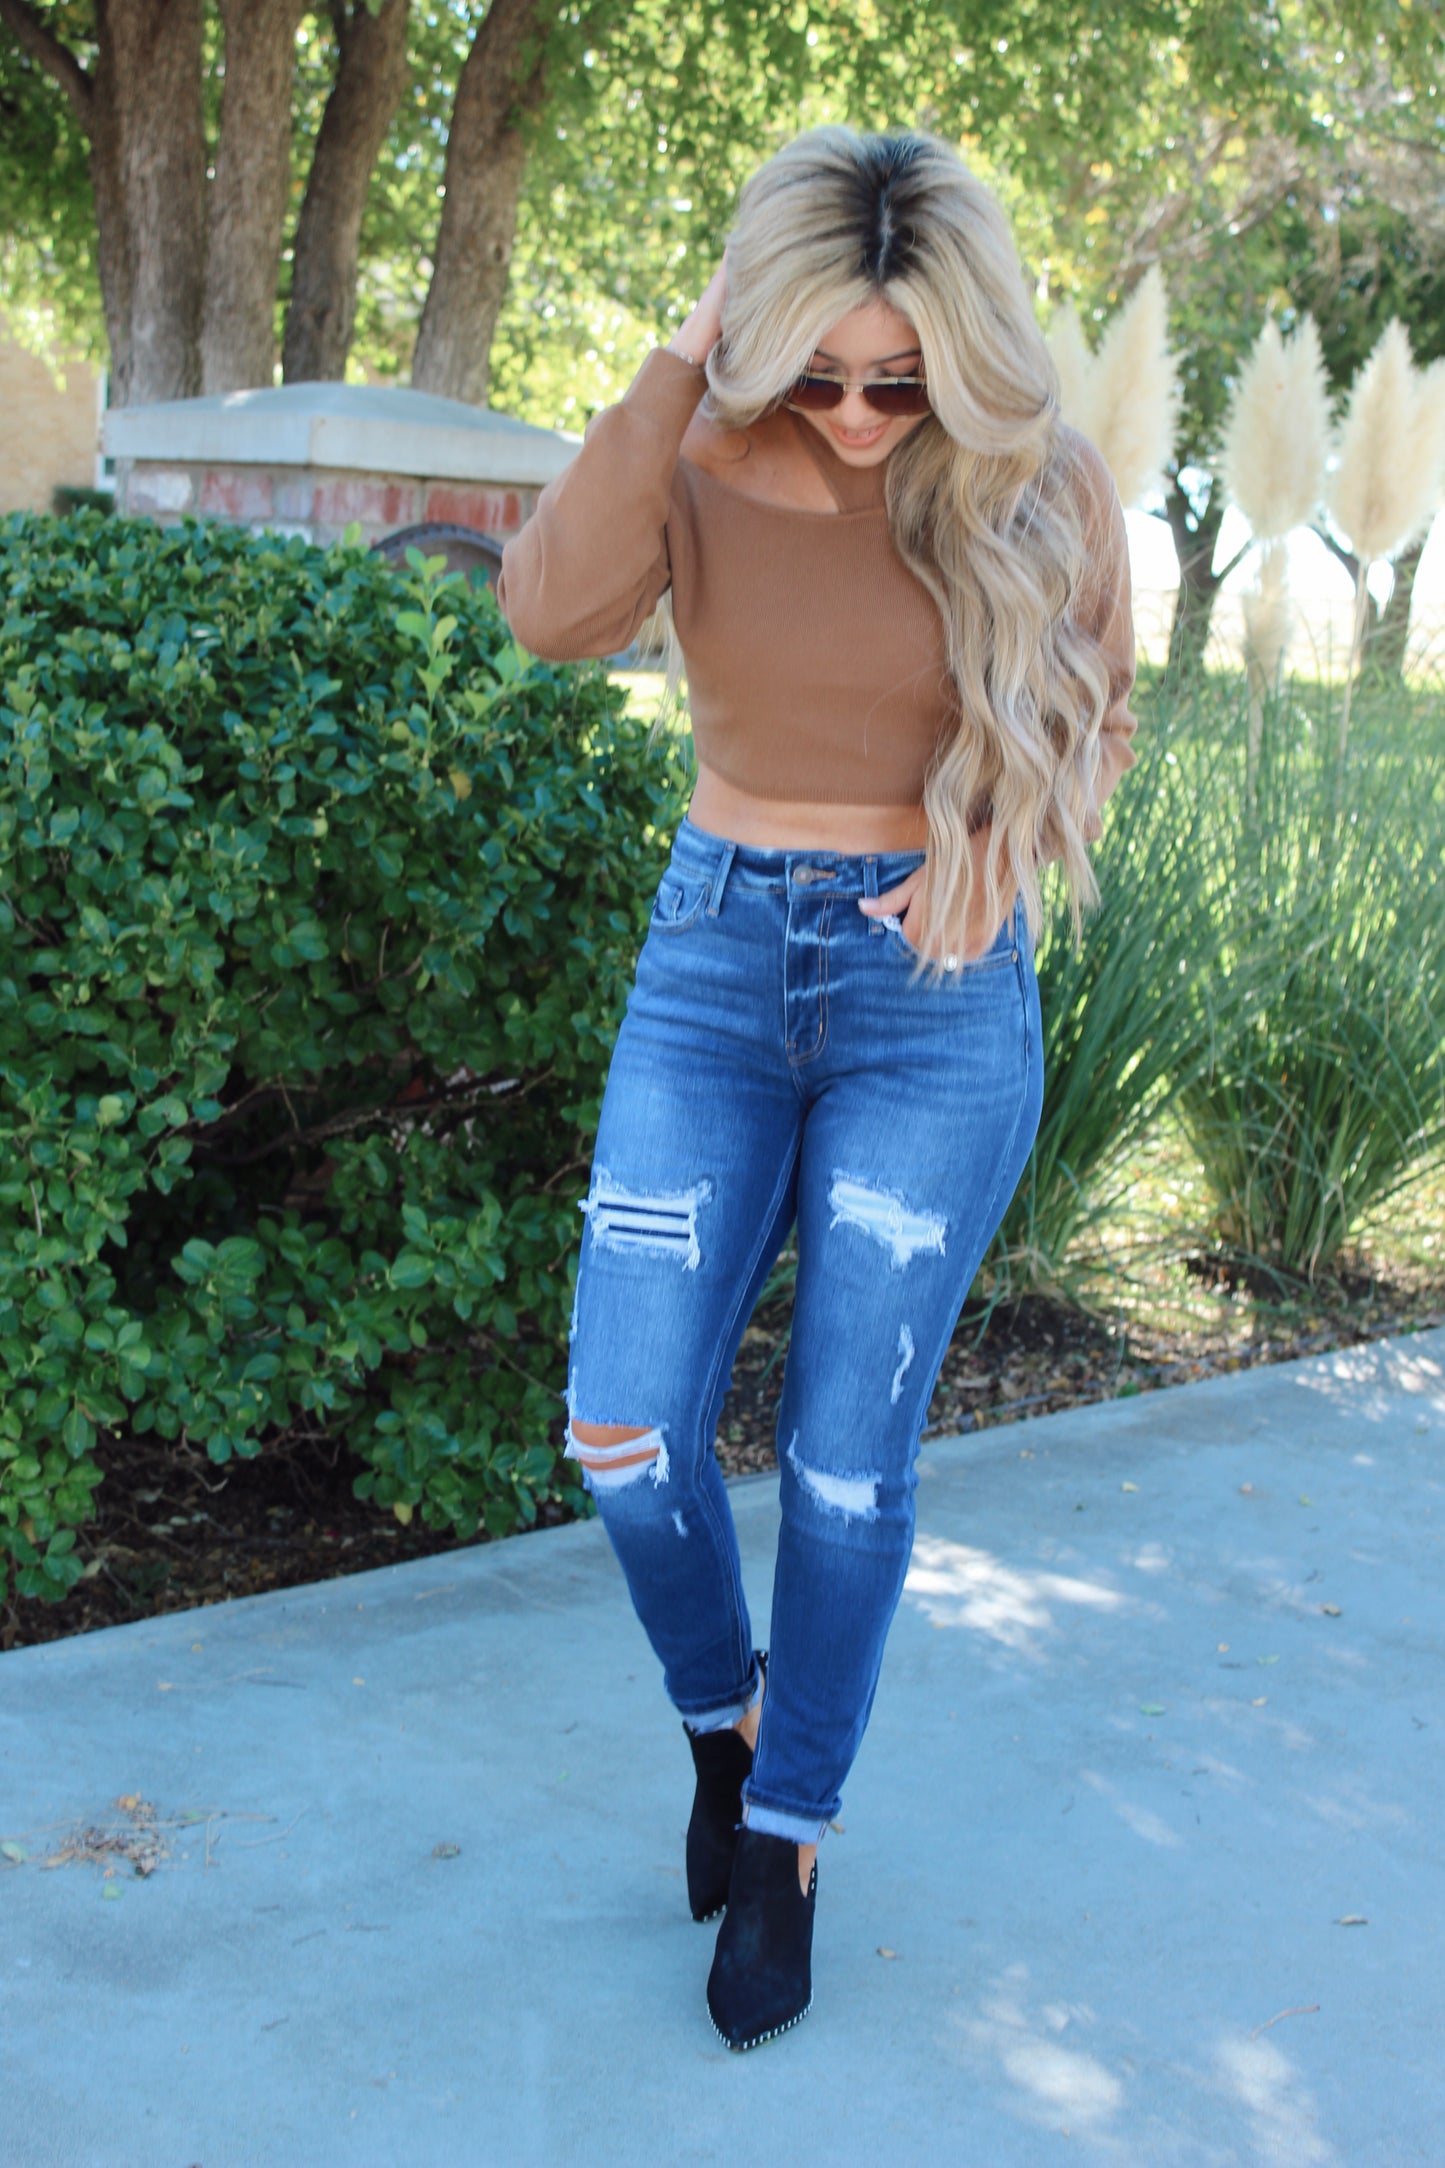 The Xoxo Cropped Brown Sweater